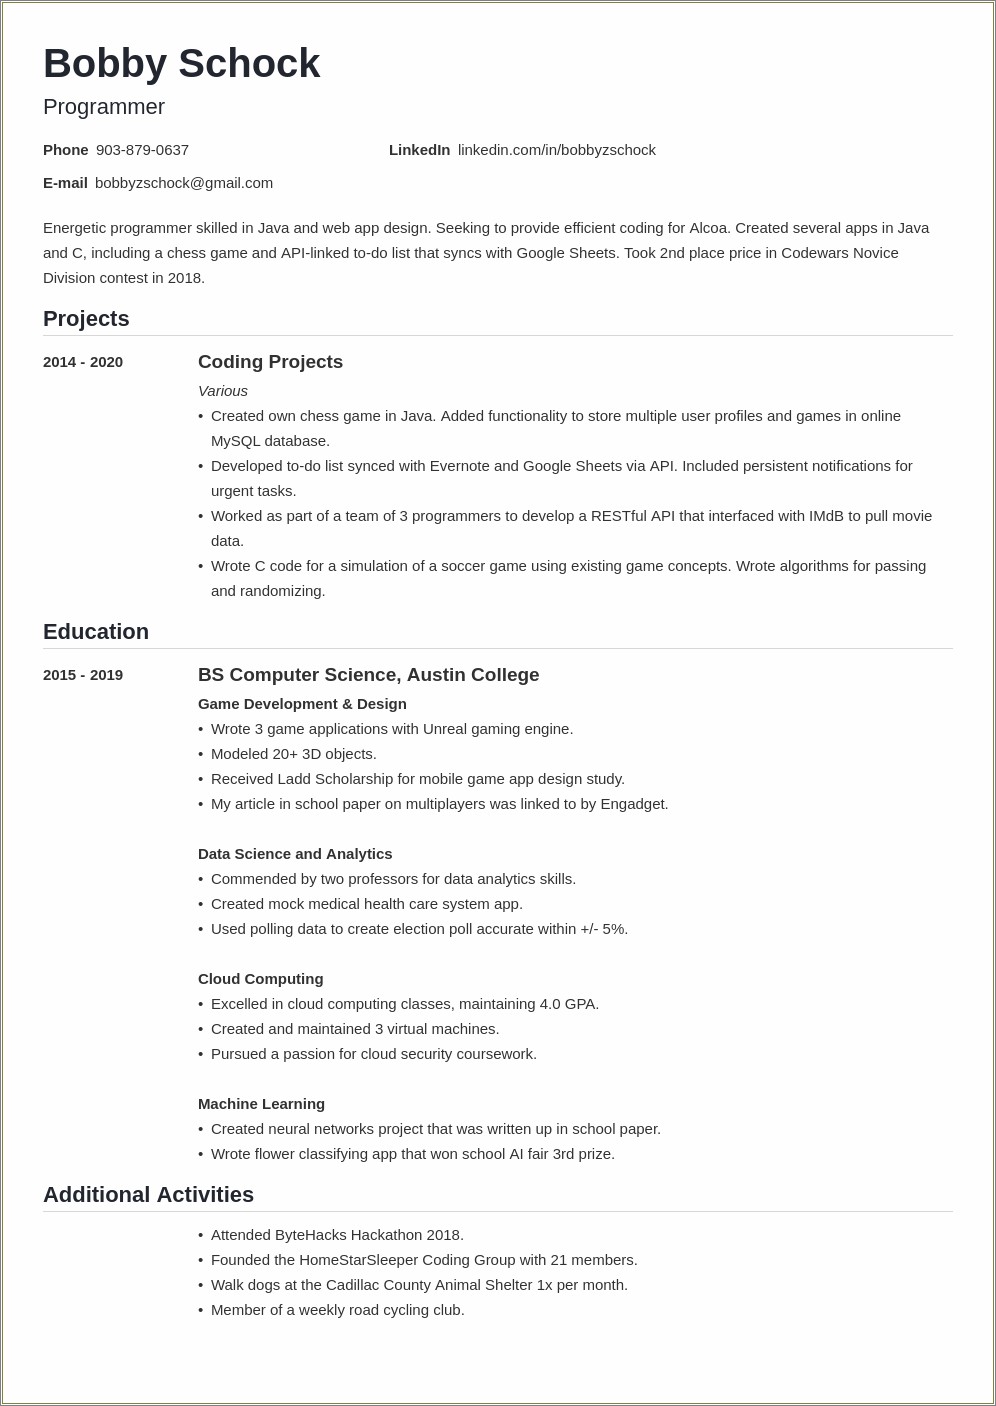 Resume Sample Objective With No Experience